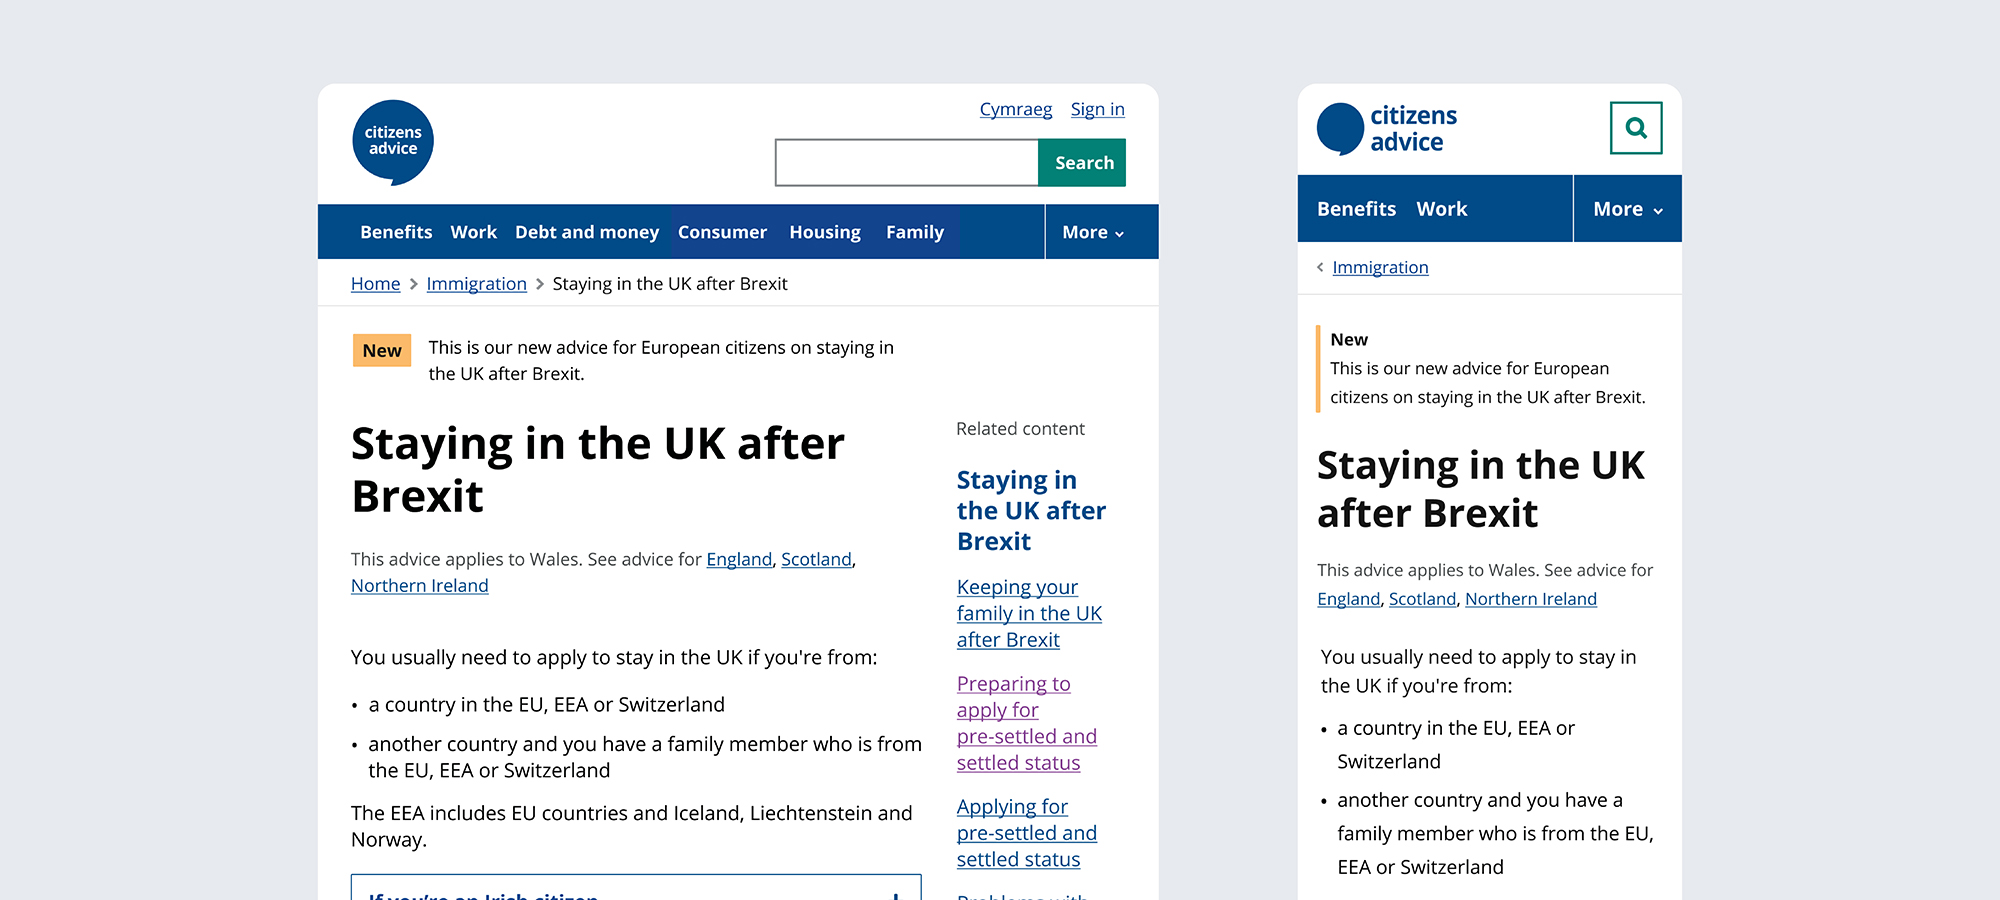 Screenshots of website showing mobile and desktop view of a content page from the immigration section